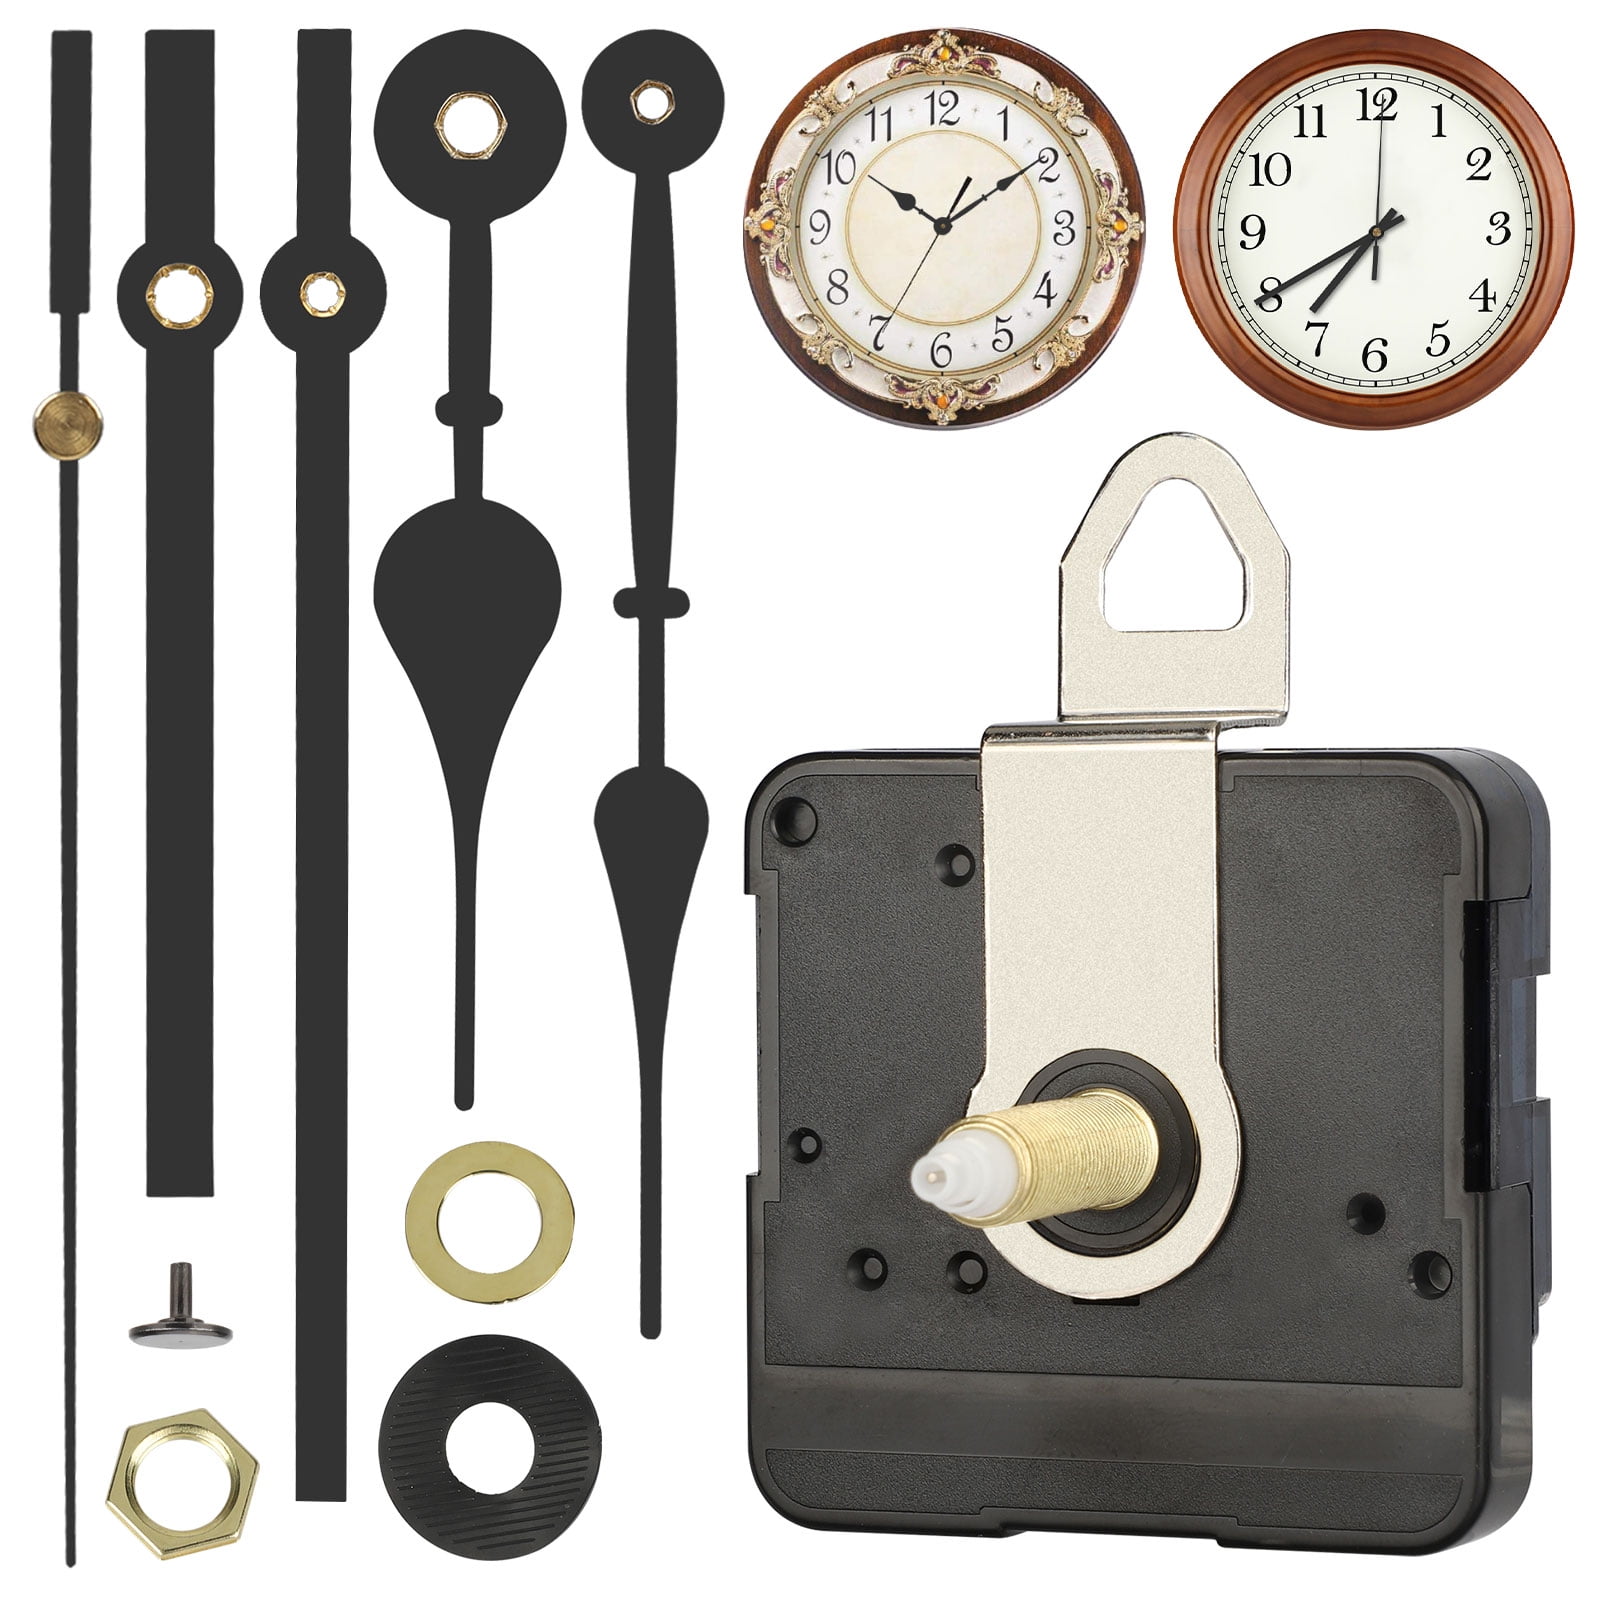 Clock Movement Mechanism With 2 1/2" Black Spade Hands for 1/4" thick dials 